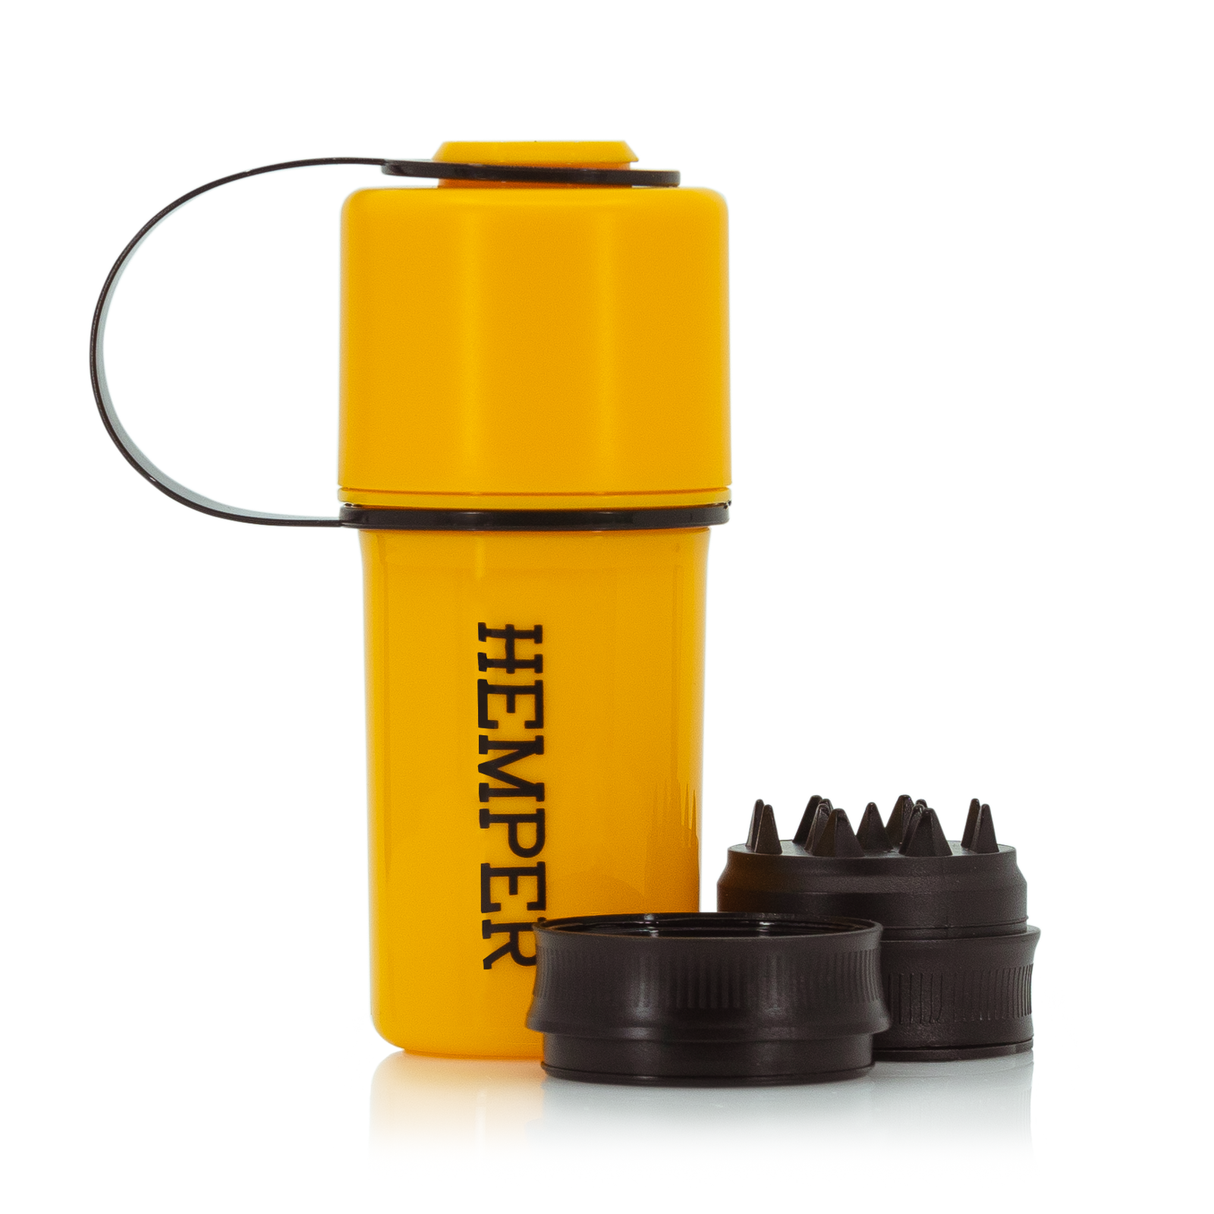 Hemper The Keeper™ 3-Part Grinder in Yellow with Storage Keychain, Front View